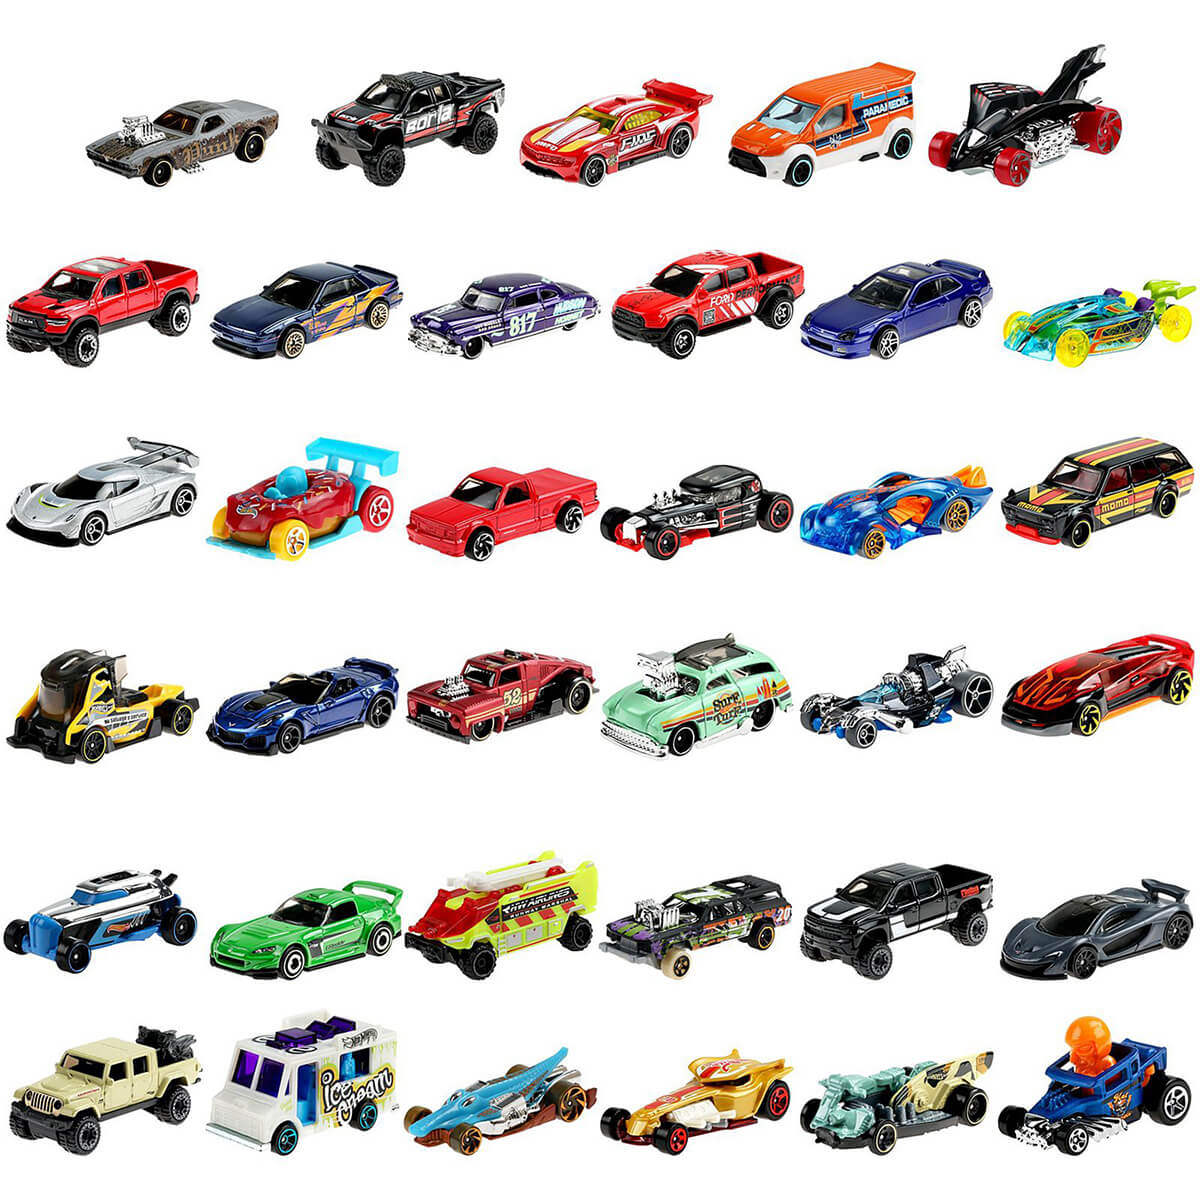 Assortment of Hot Wheels 1:64 Scale Vehicle from 2020-2021